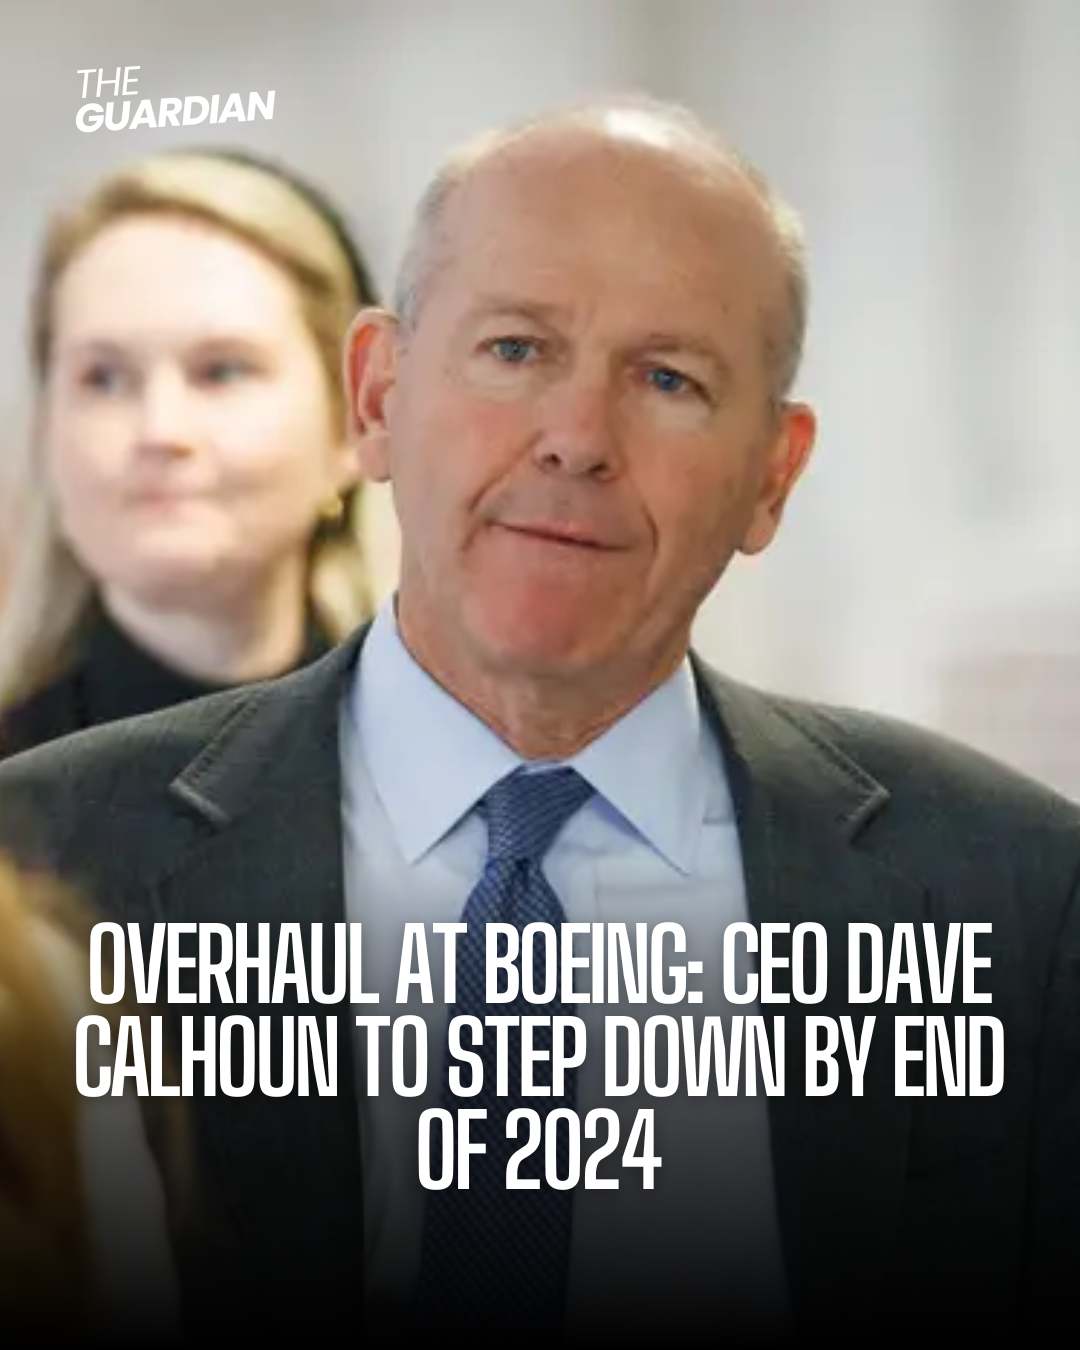 Boeing has announced a major management shakeup, including the resignation of CEO Dave Calhoun by the end of 2024.